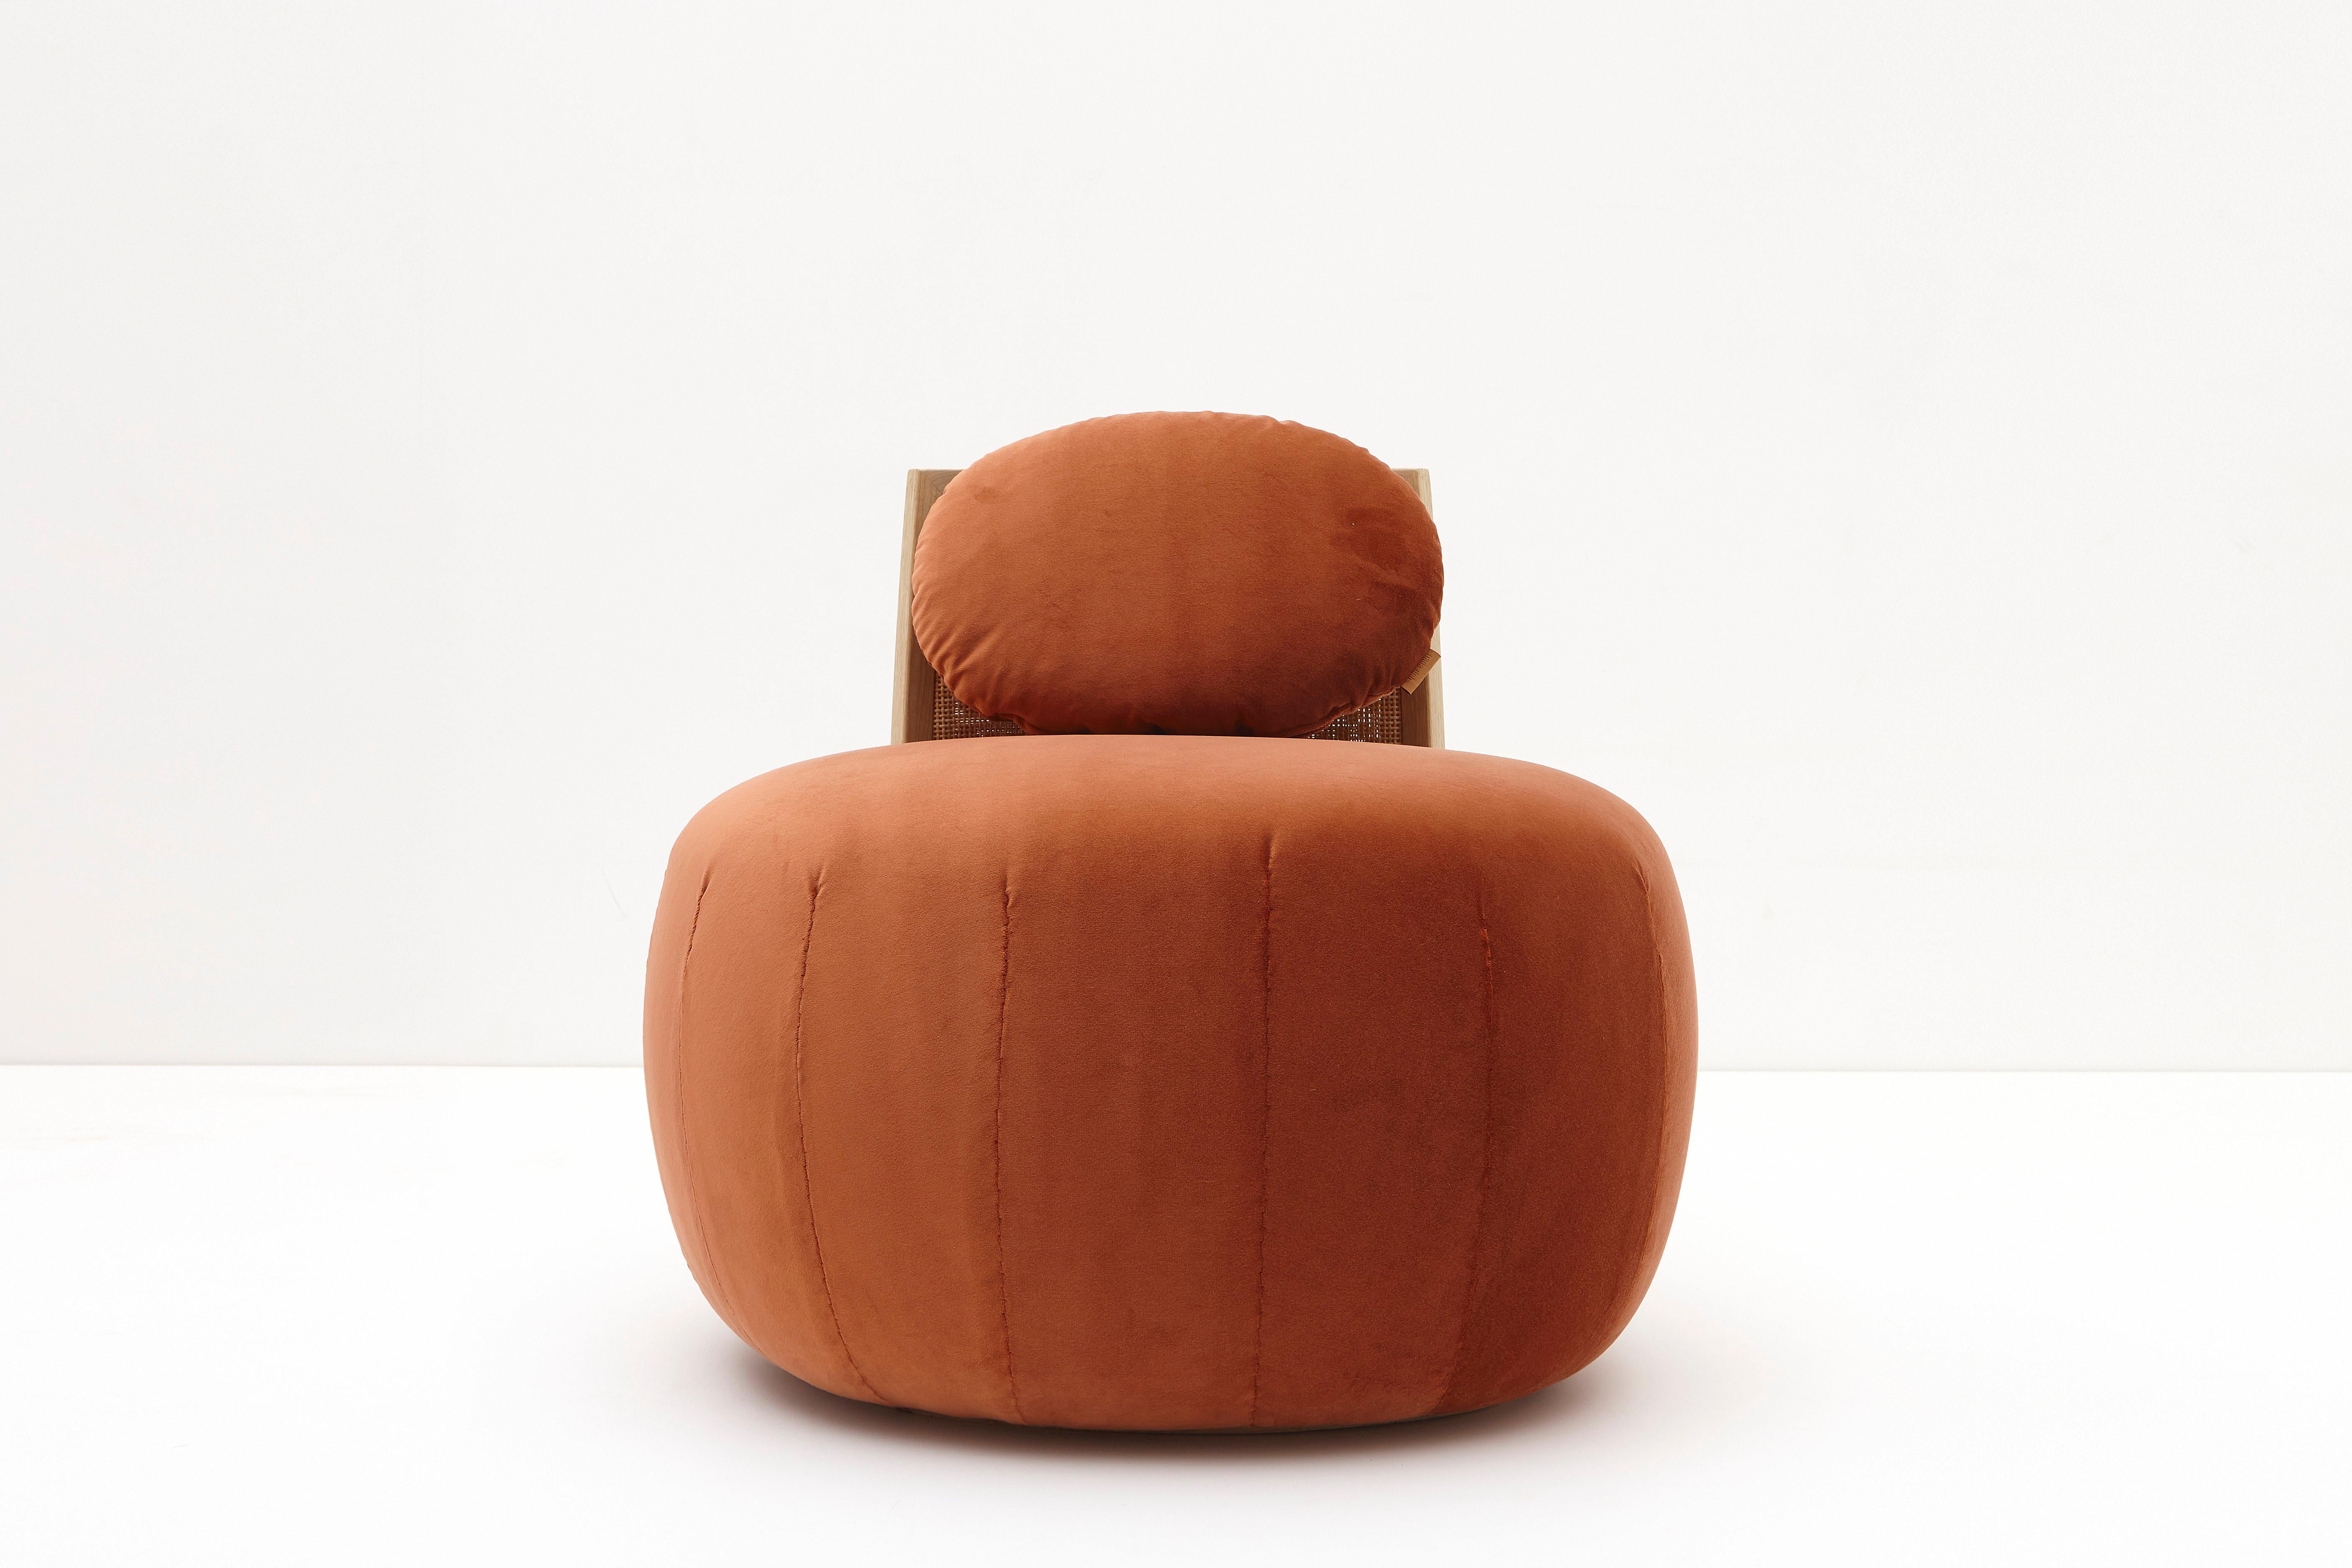 This unique piece is part of the 'Stitched Horizons’ collection of five pebble chairs designed by much-acclaimed designer in the Near and Middle East Nada Debs, renowned for cleverly distilling culture and craftsmanship in works imbued with